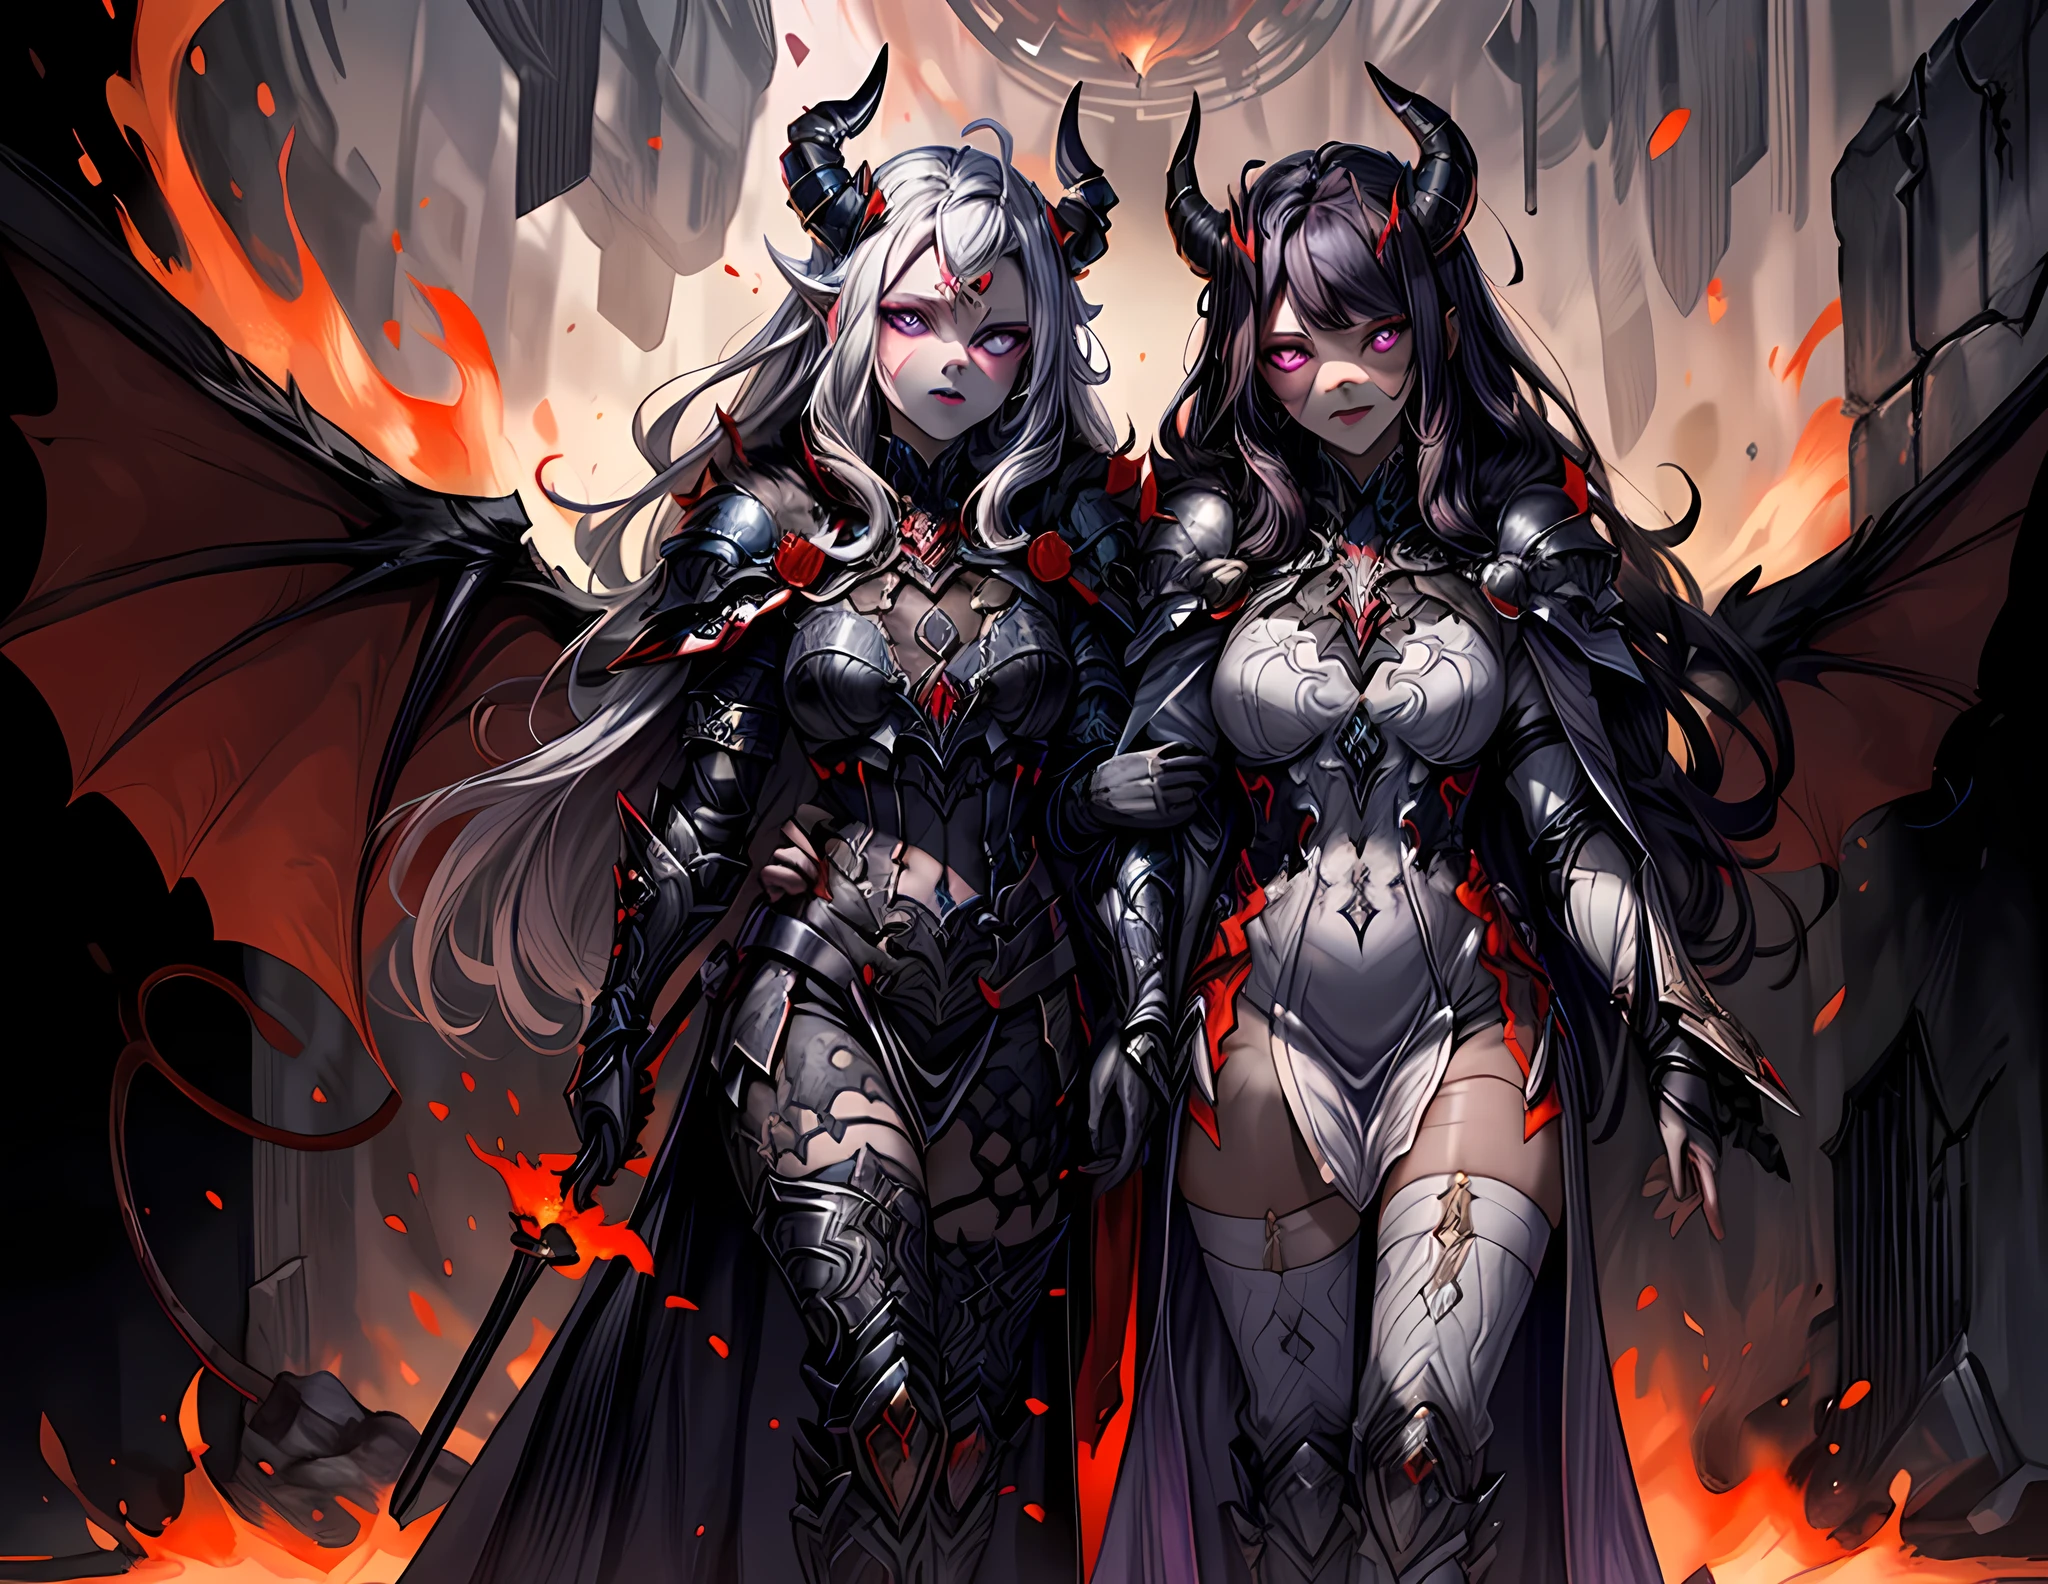 fantasy art, RPG art, masterpiece, a portrait picture o hellish female demon from hell, she has (black horns: 1.2), (black: 1.2) demon wings, (red: 1.3) skin, red lava dripping from her, she wears (white: 1.3) armor, (purple: 1.3) ArmoredDress, streams of rolling lava, hell in the background, 3d rendering, shadow wings